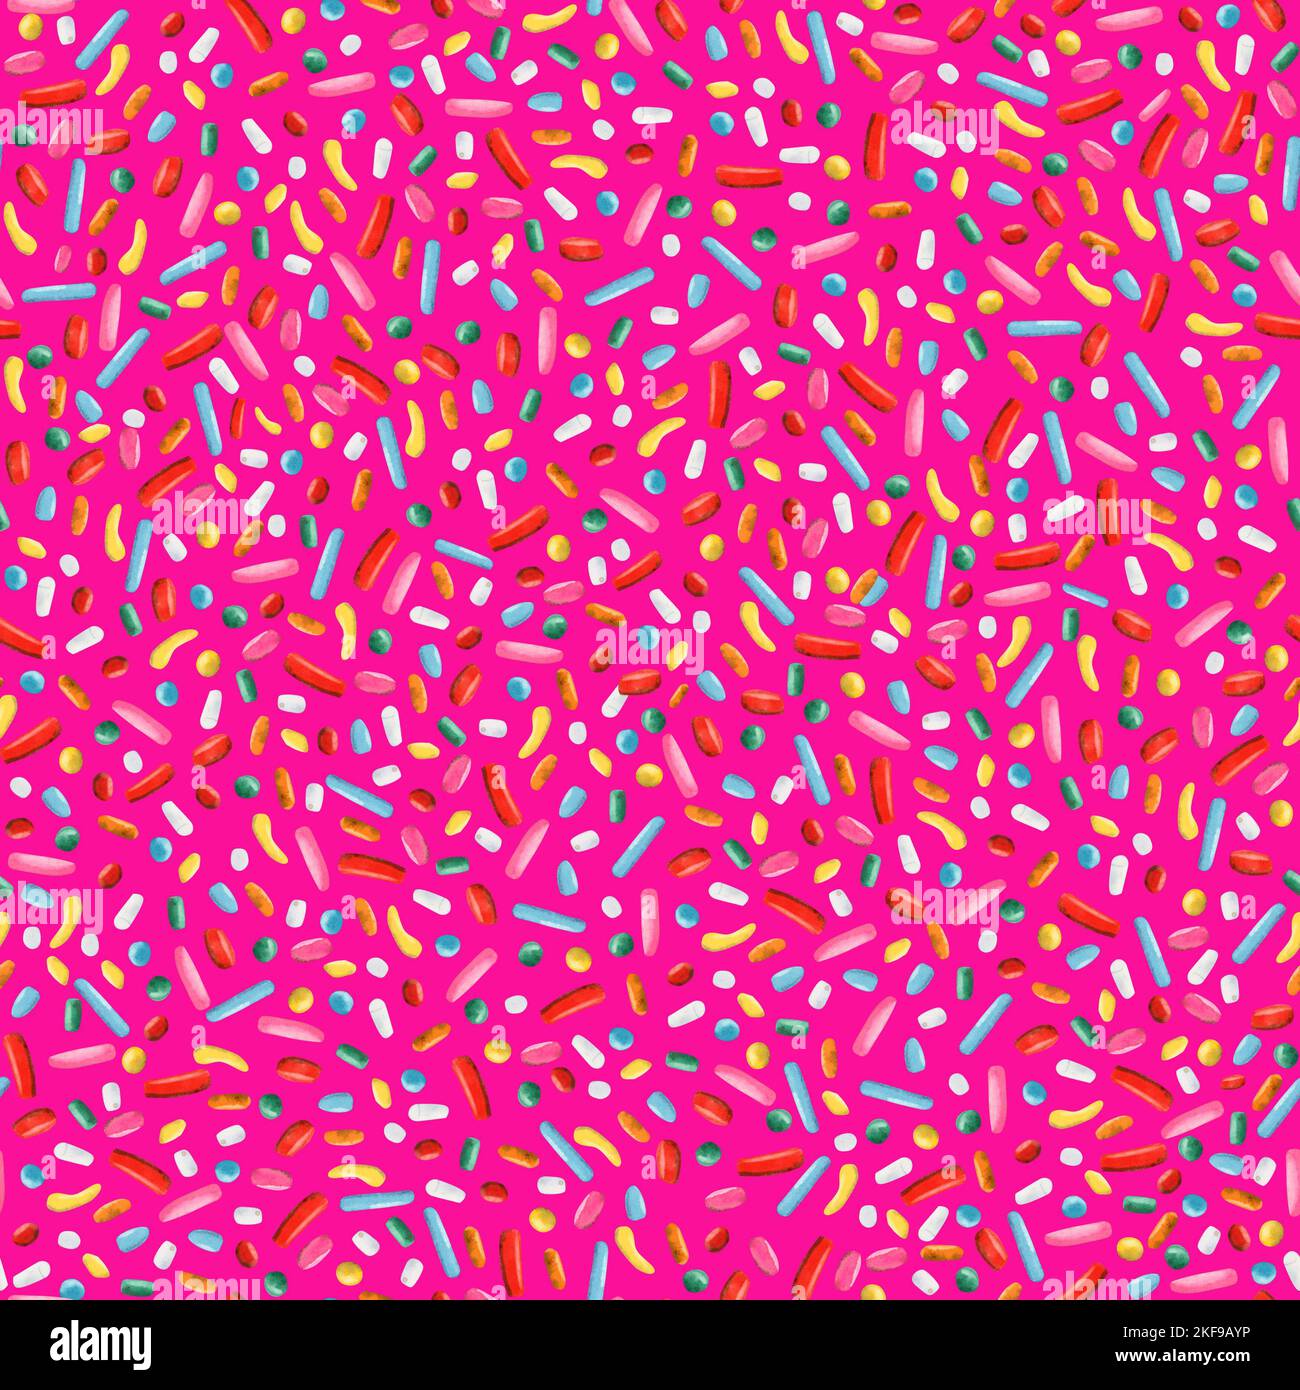 Neon pink sprinkles seamless pattern . Colorful confetti falling background for holiday or party designs. Stock Photo